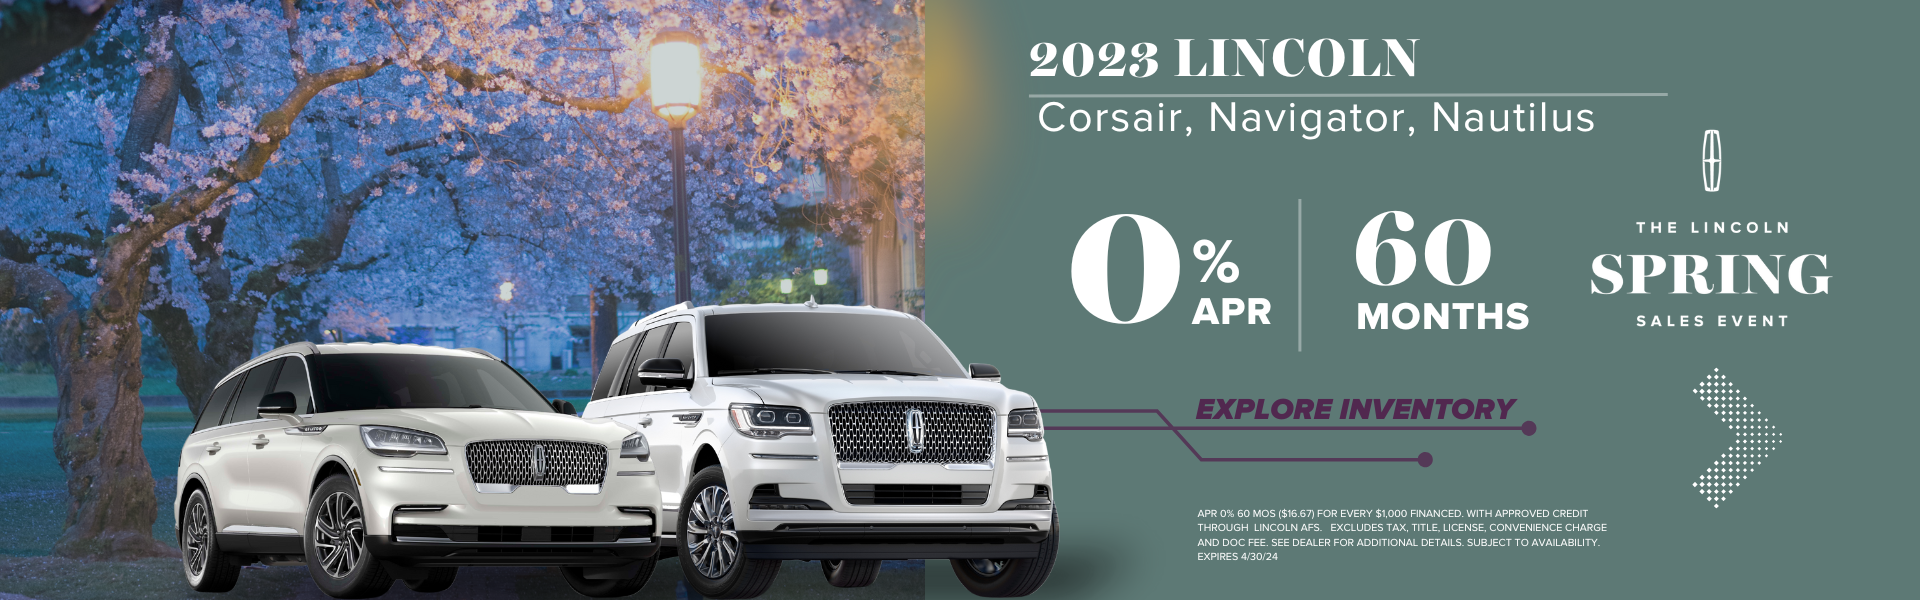 The Lincoln Spring Sales Event